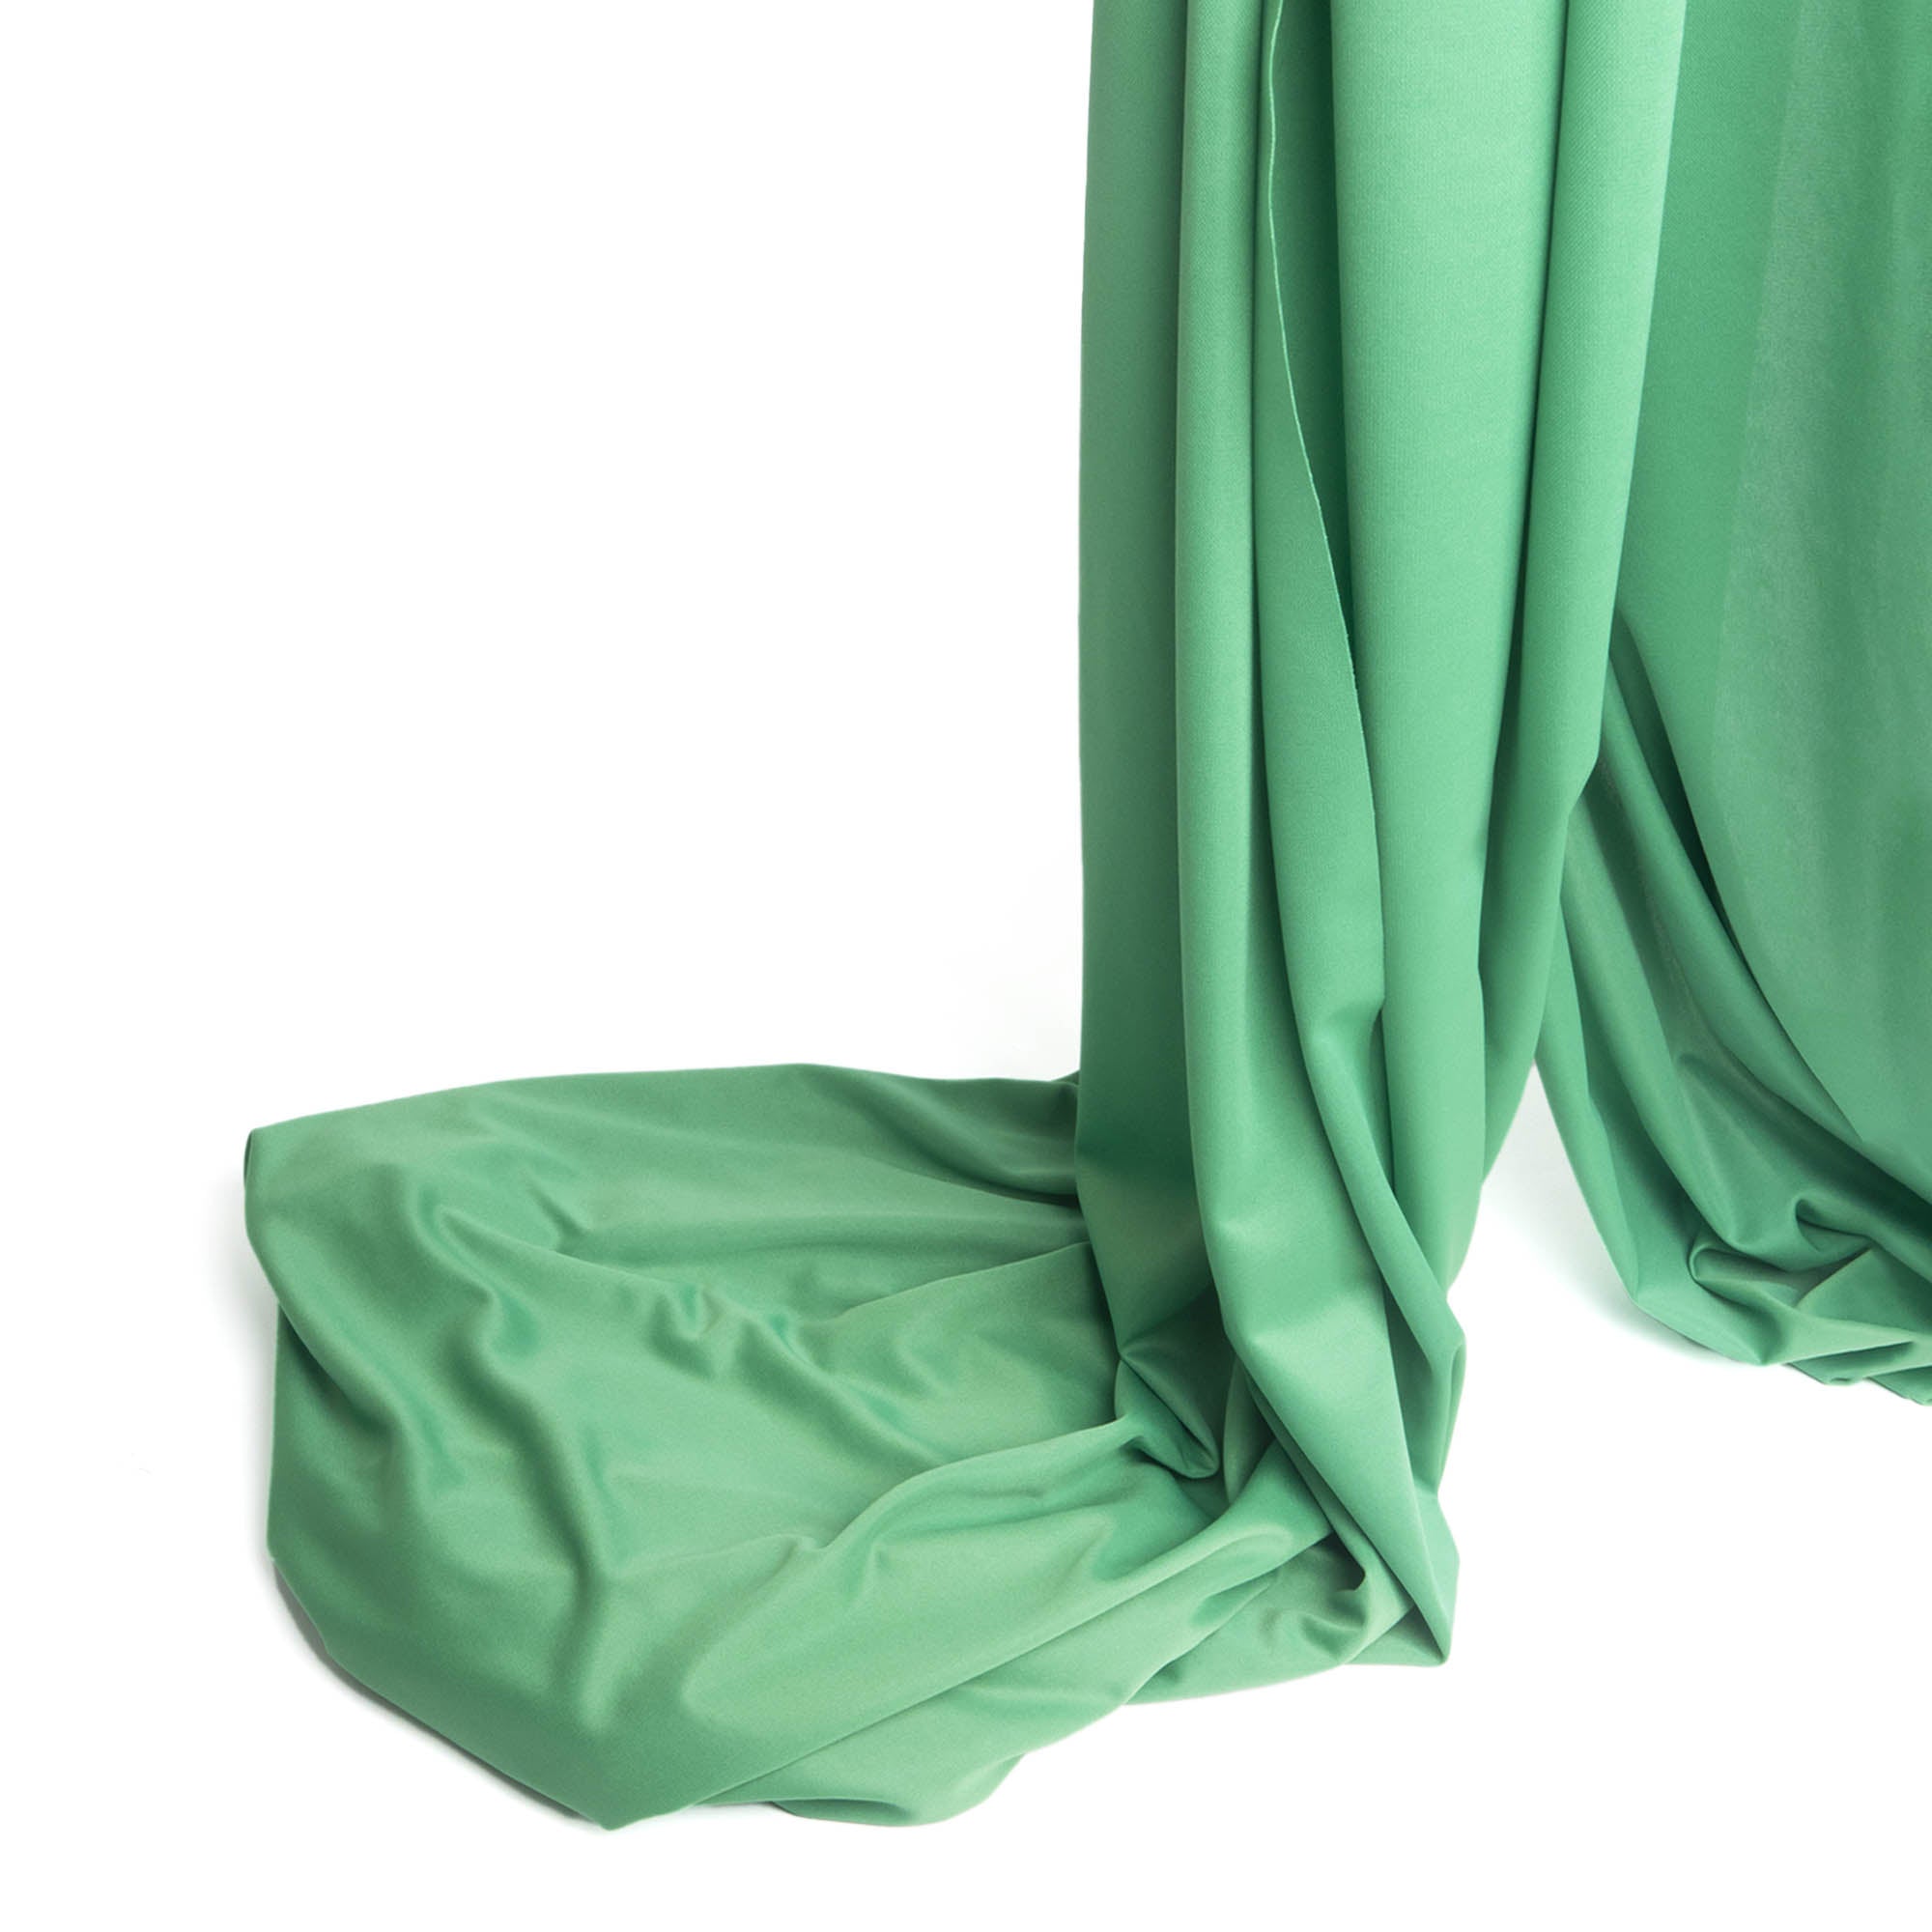 Kelly Green silk close up end